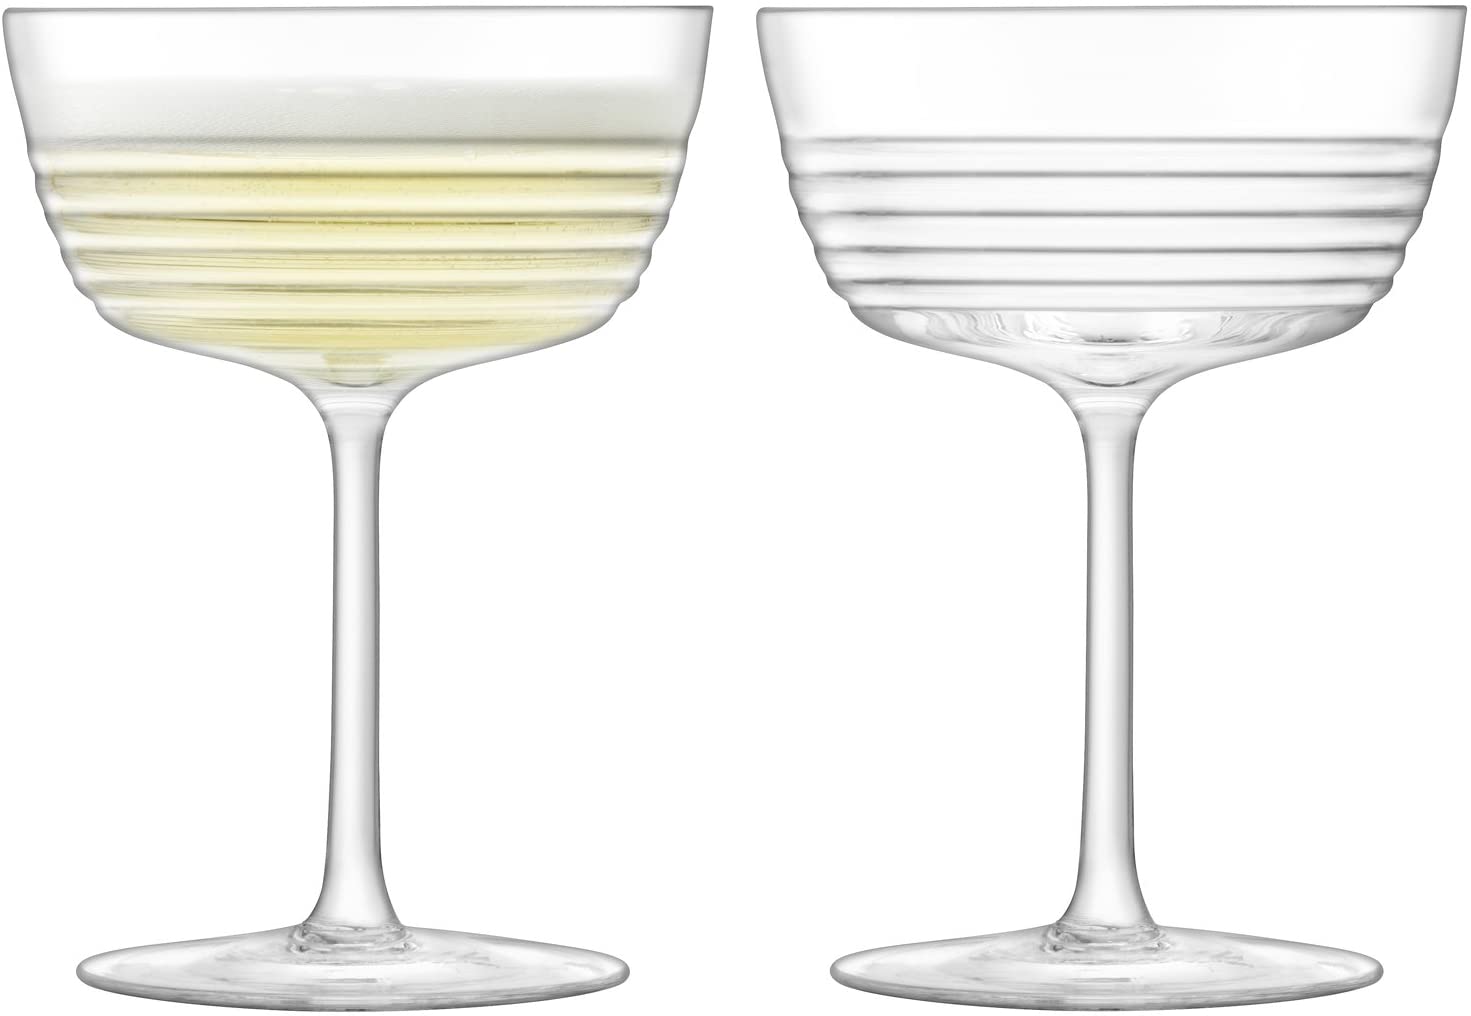 LSA International Groove Champagne / Cocktail Glass 9.25 oz / 265 ml, Clear, Set of 2